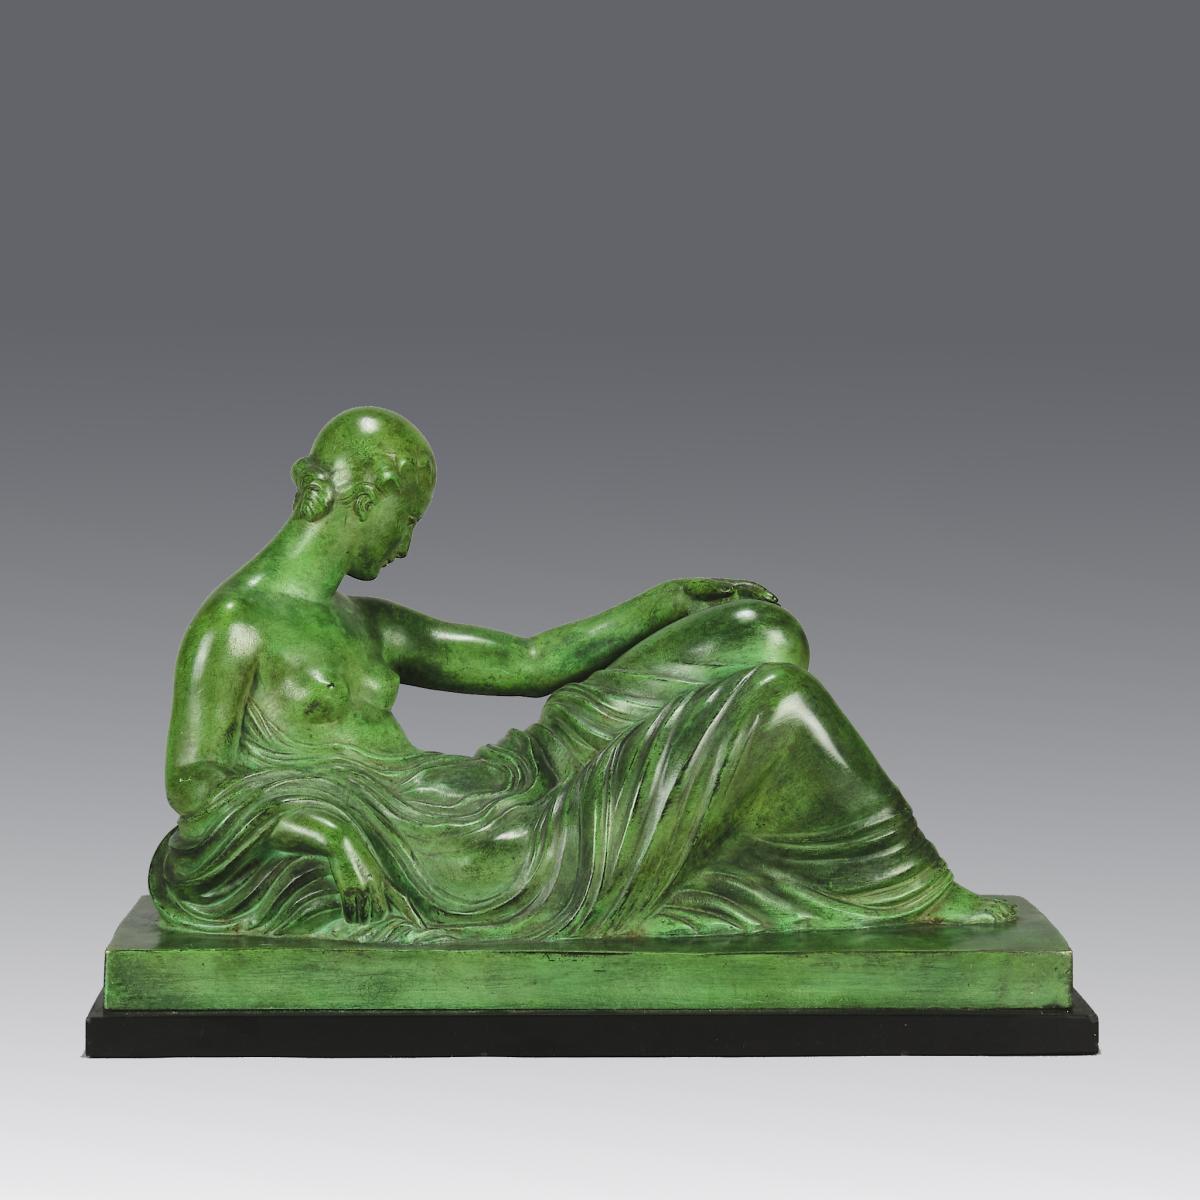 Early 20th Century Patinated Bronze entitled "Femme Allongée" by Gaston Béguin